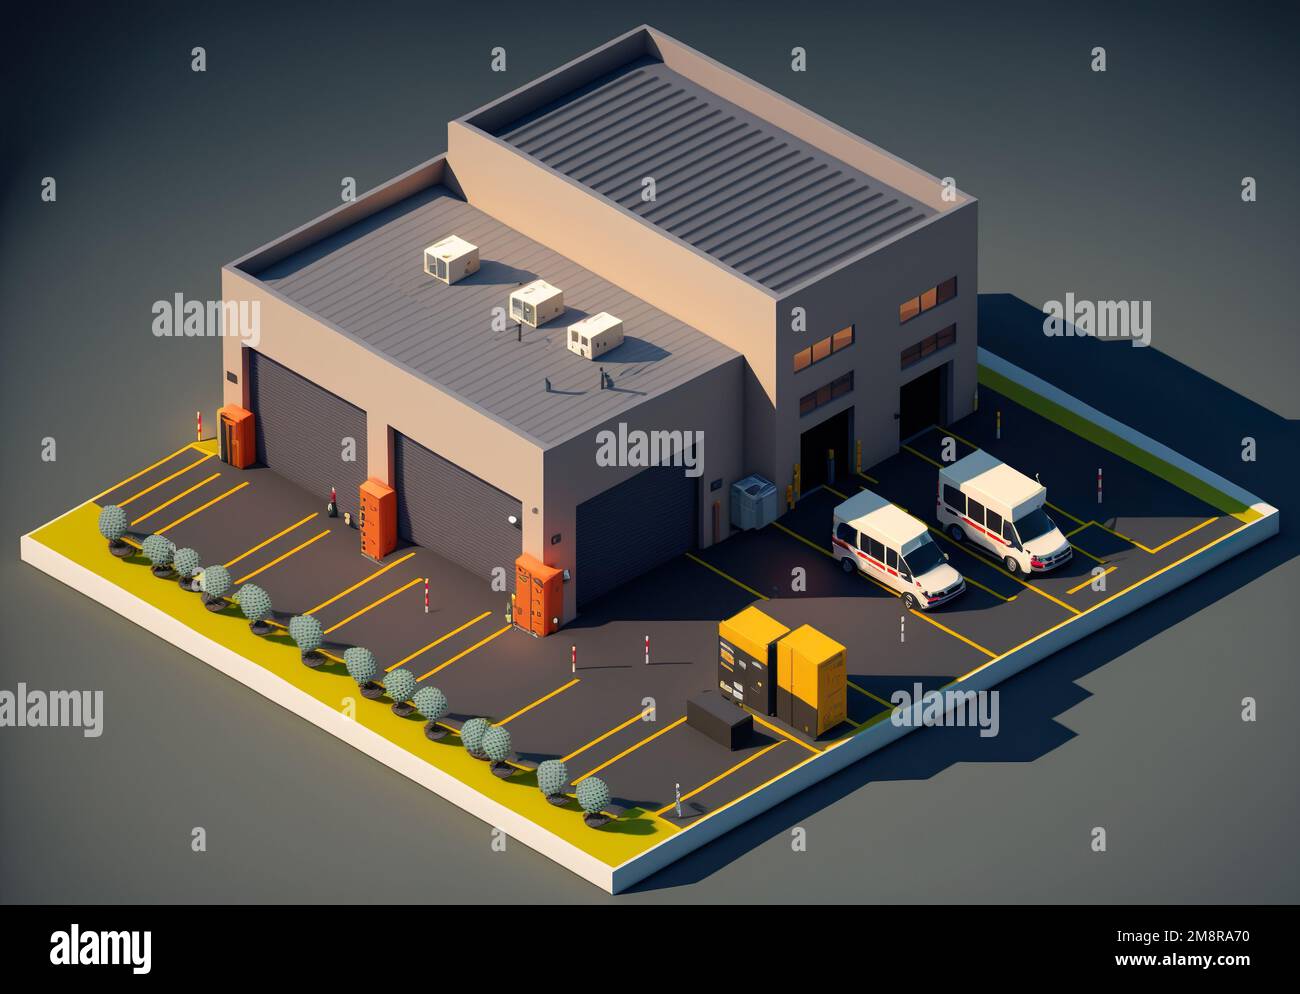 Isometric of warehouse exterior with logistic delivery services Stock Photo